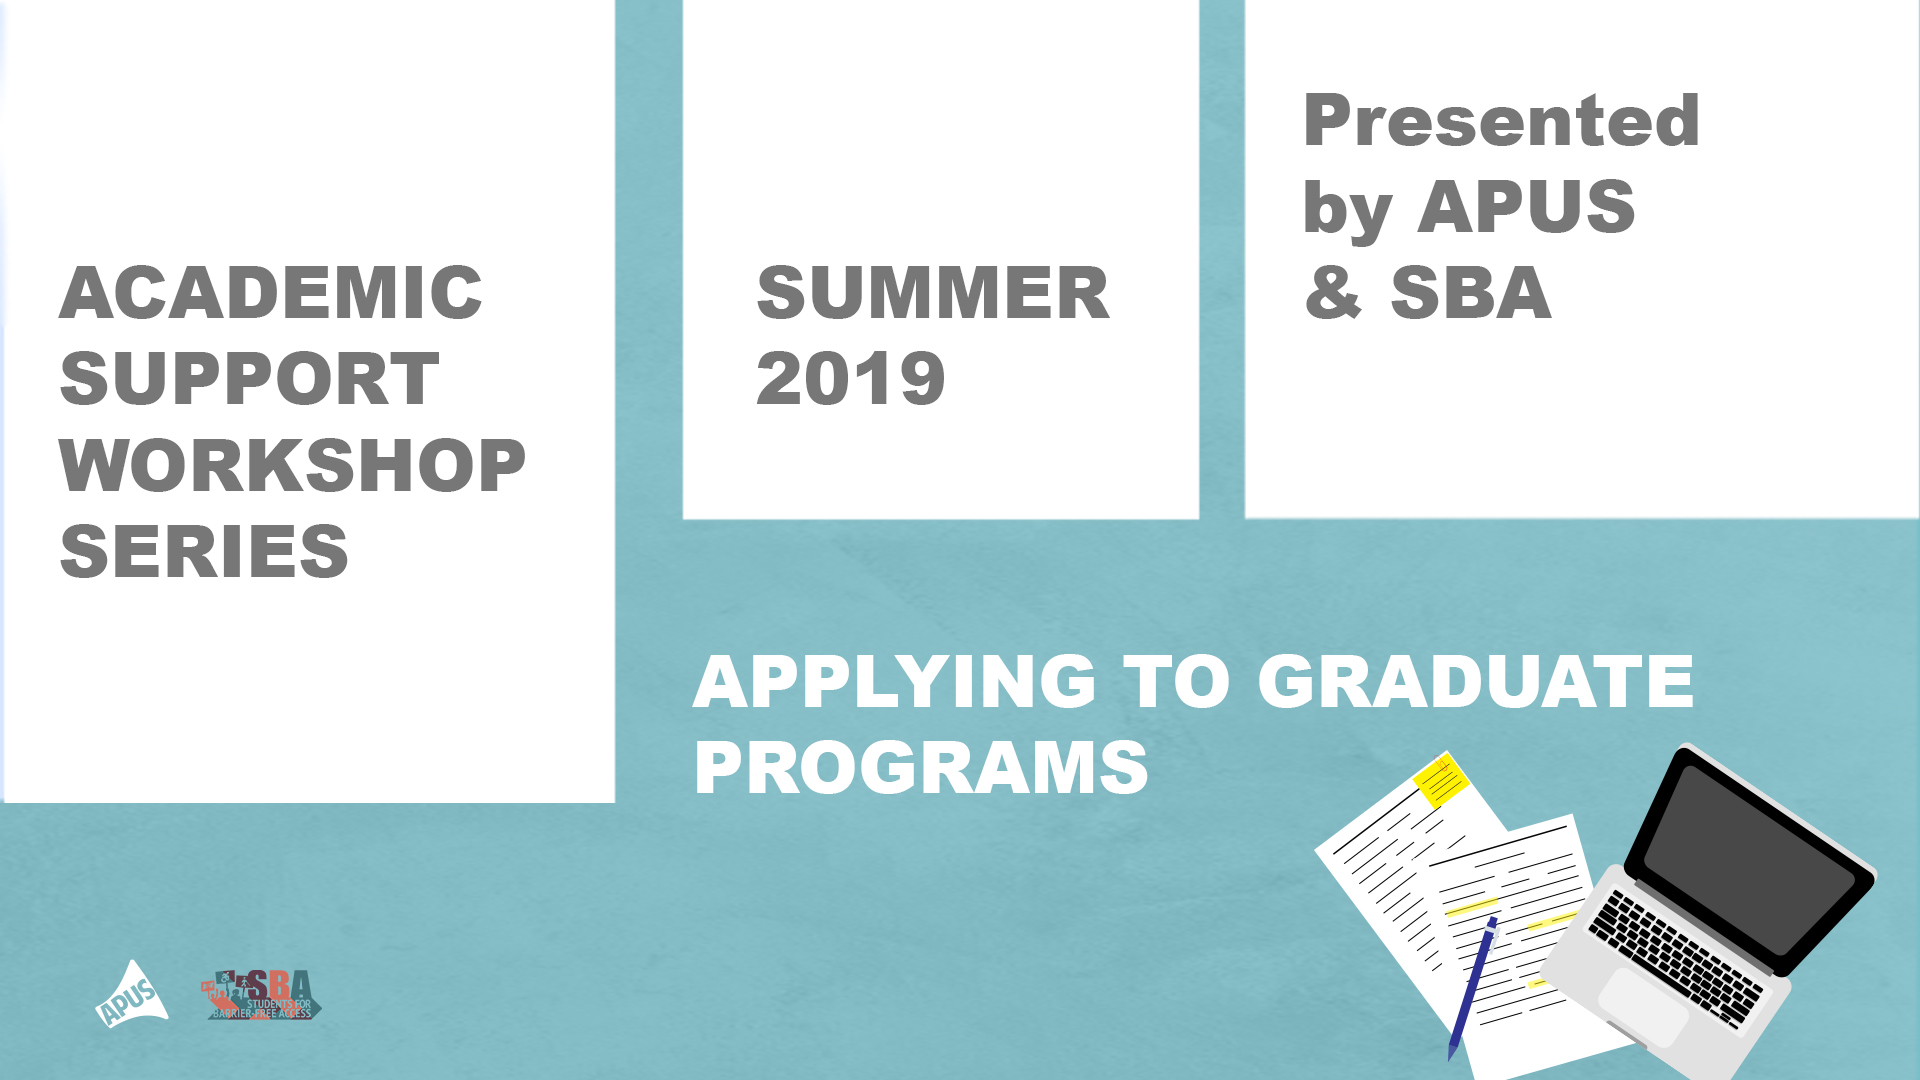 Workshop banner with text that reads, "Academic Support Workshop Series. Summer 2019. Presented by APUS and SBA. Applying to Graduate Programs."